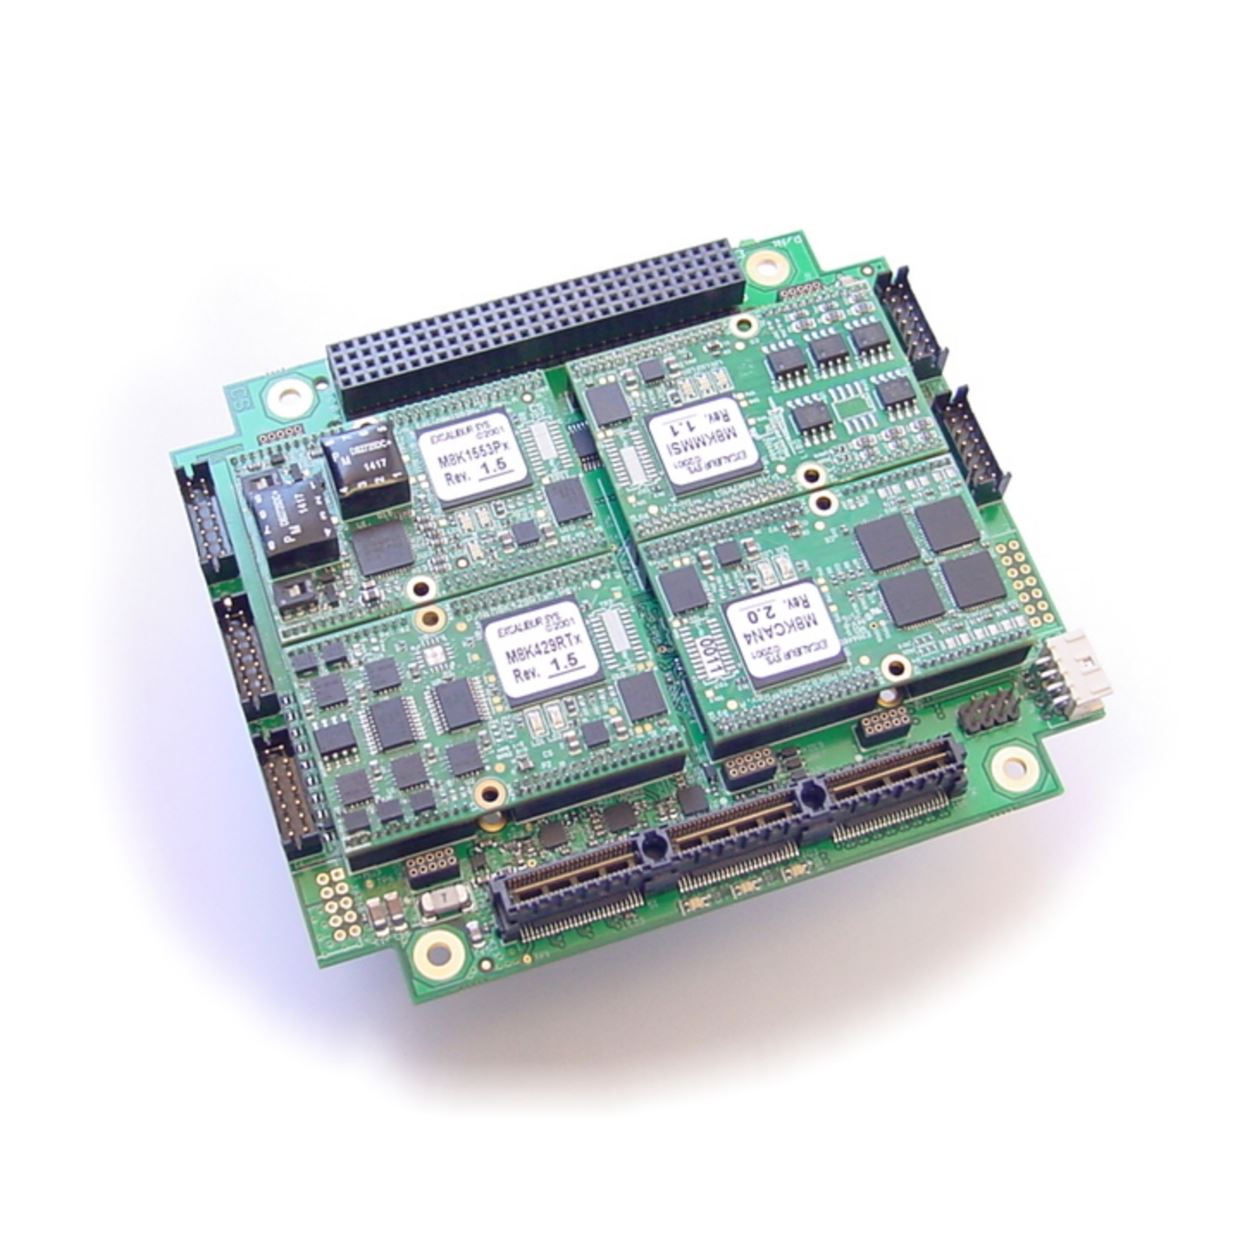 MIL-STD-1553 test and simulation board for PCI/104-Express systems